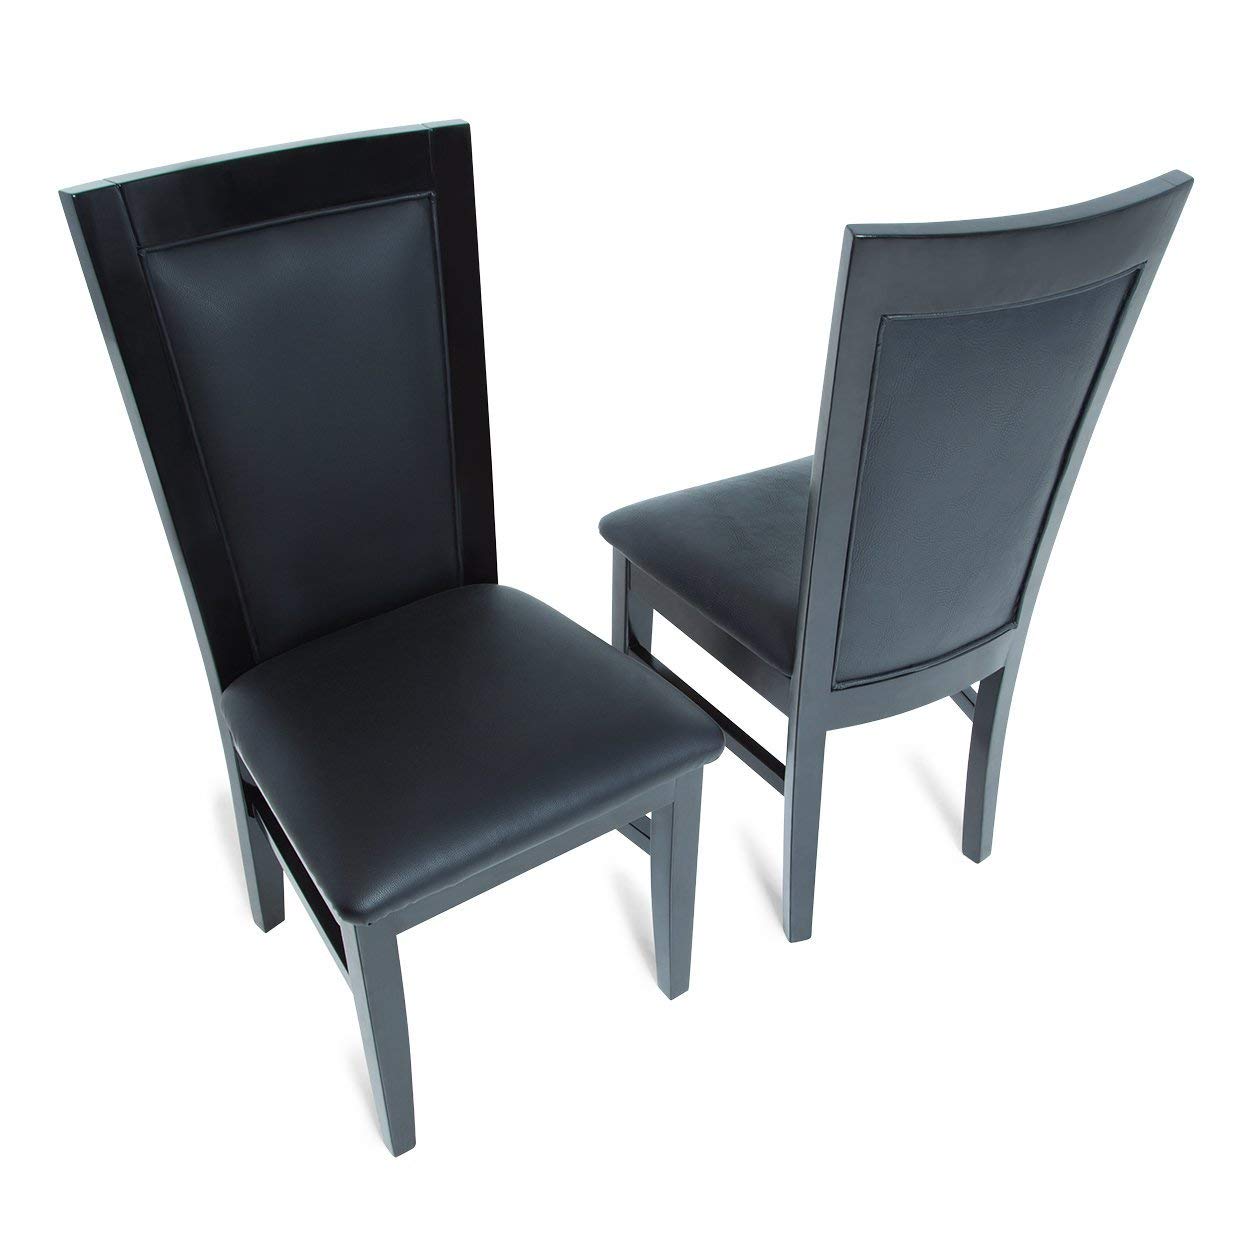 Poker Chairs by BBO Poker Tables